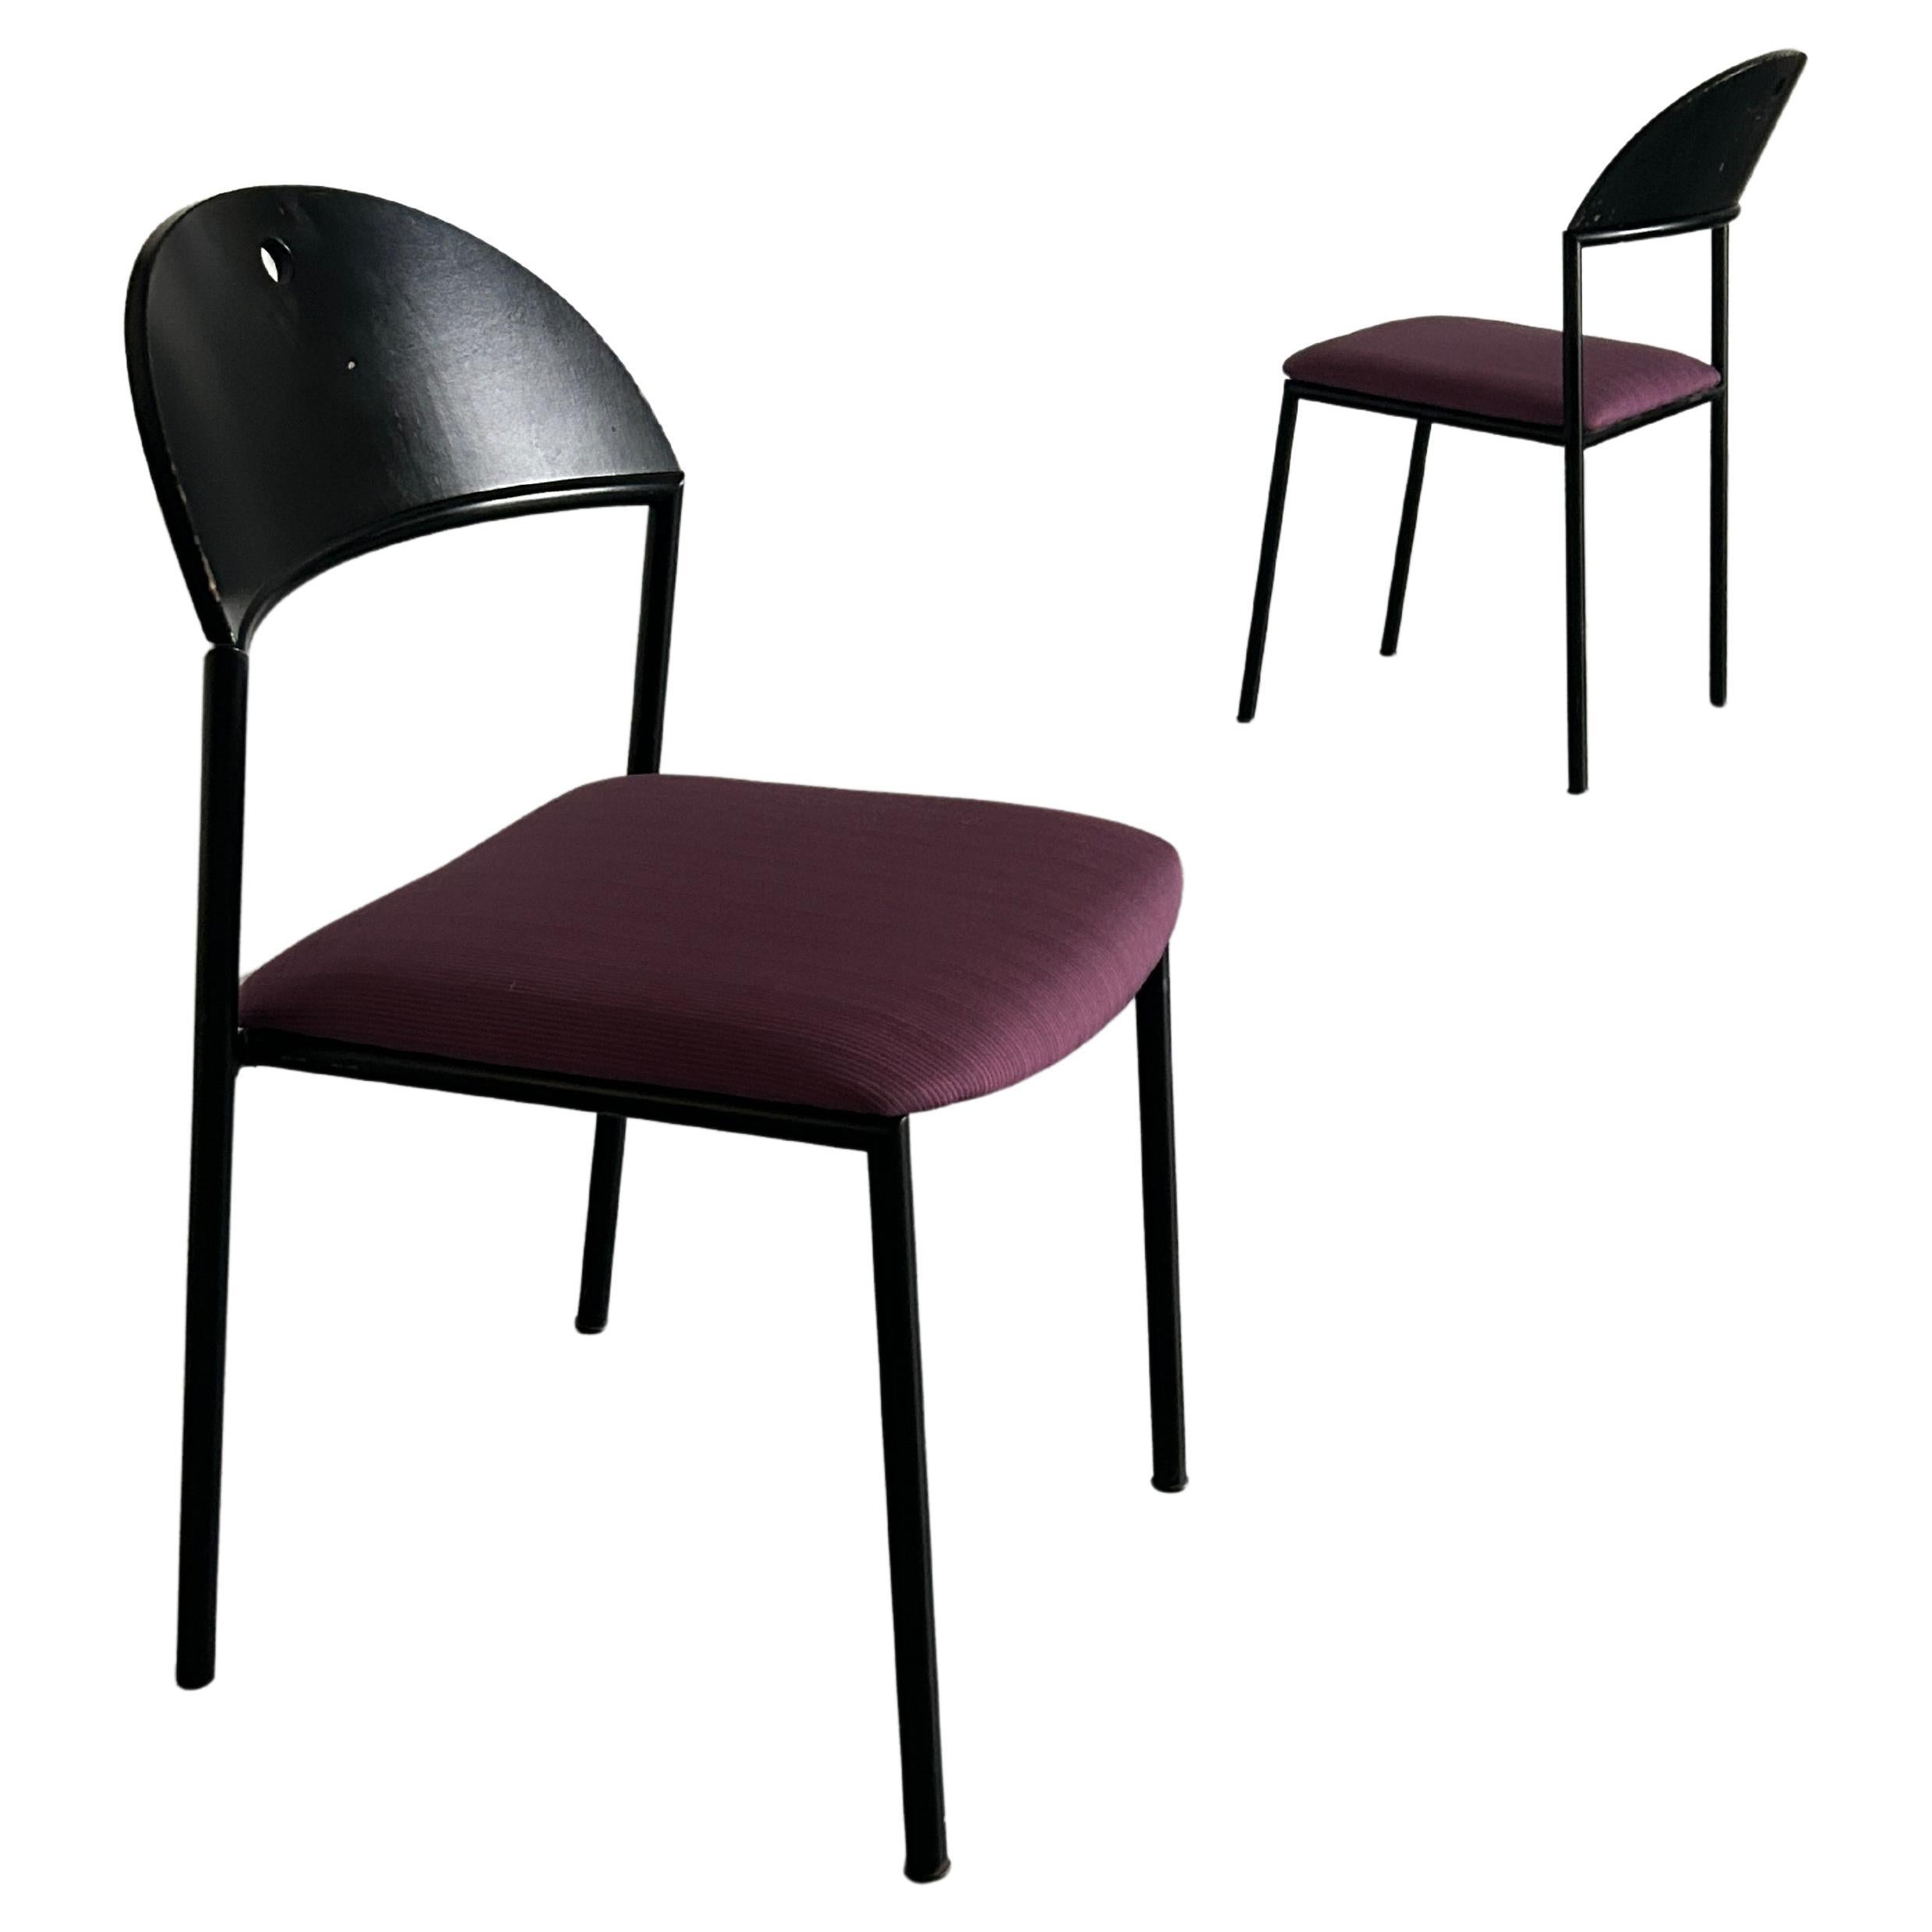 Pair of Postmodern 'Thesis' Visitor Dining Chairs by Wiesner Hager, 90s Austria